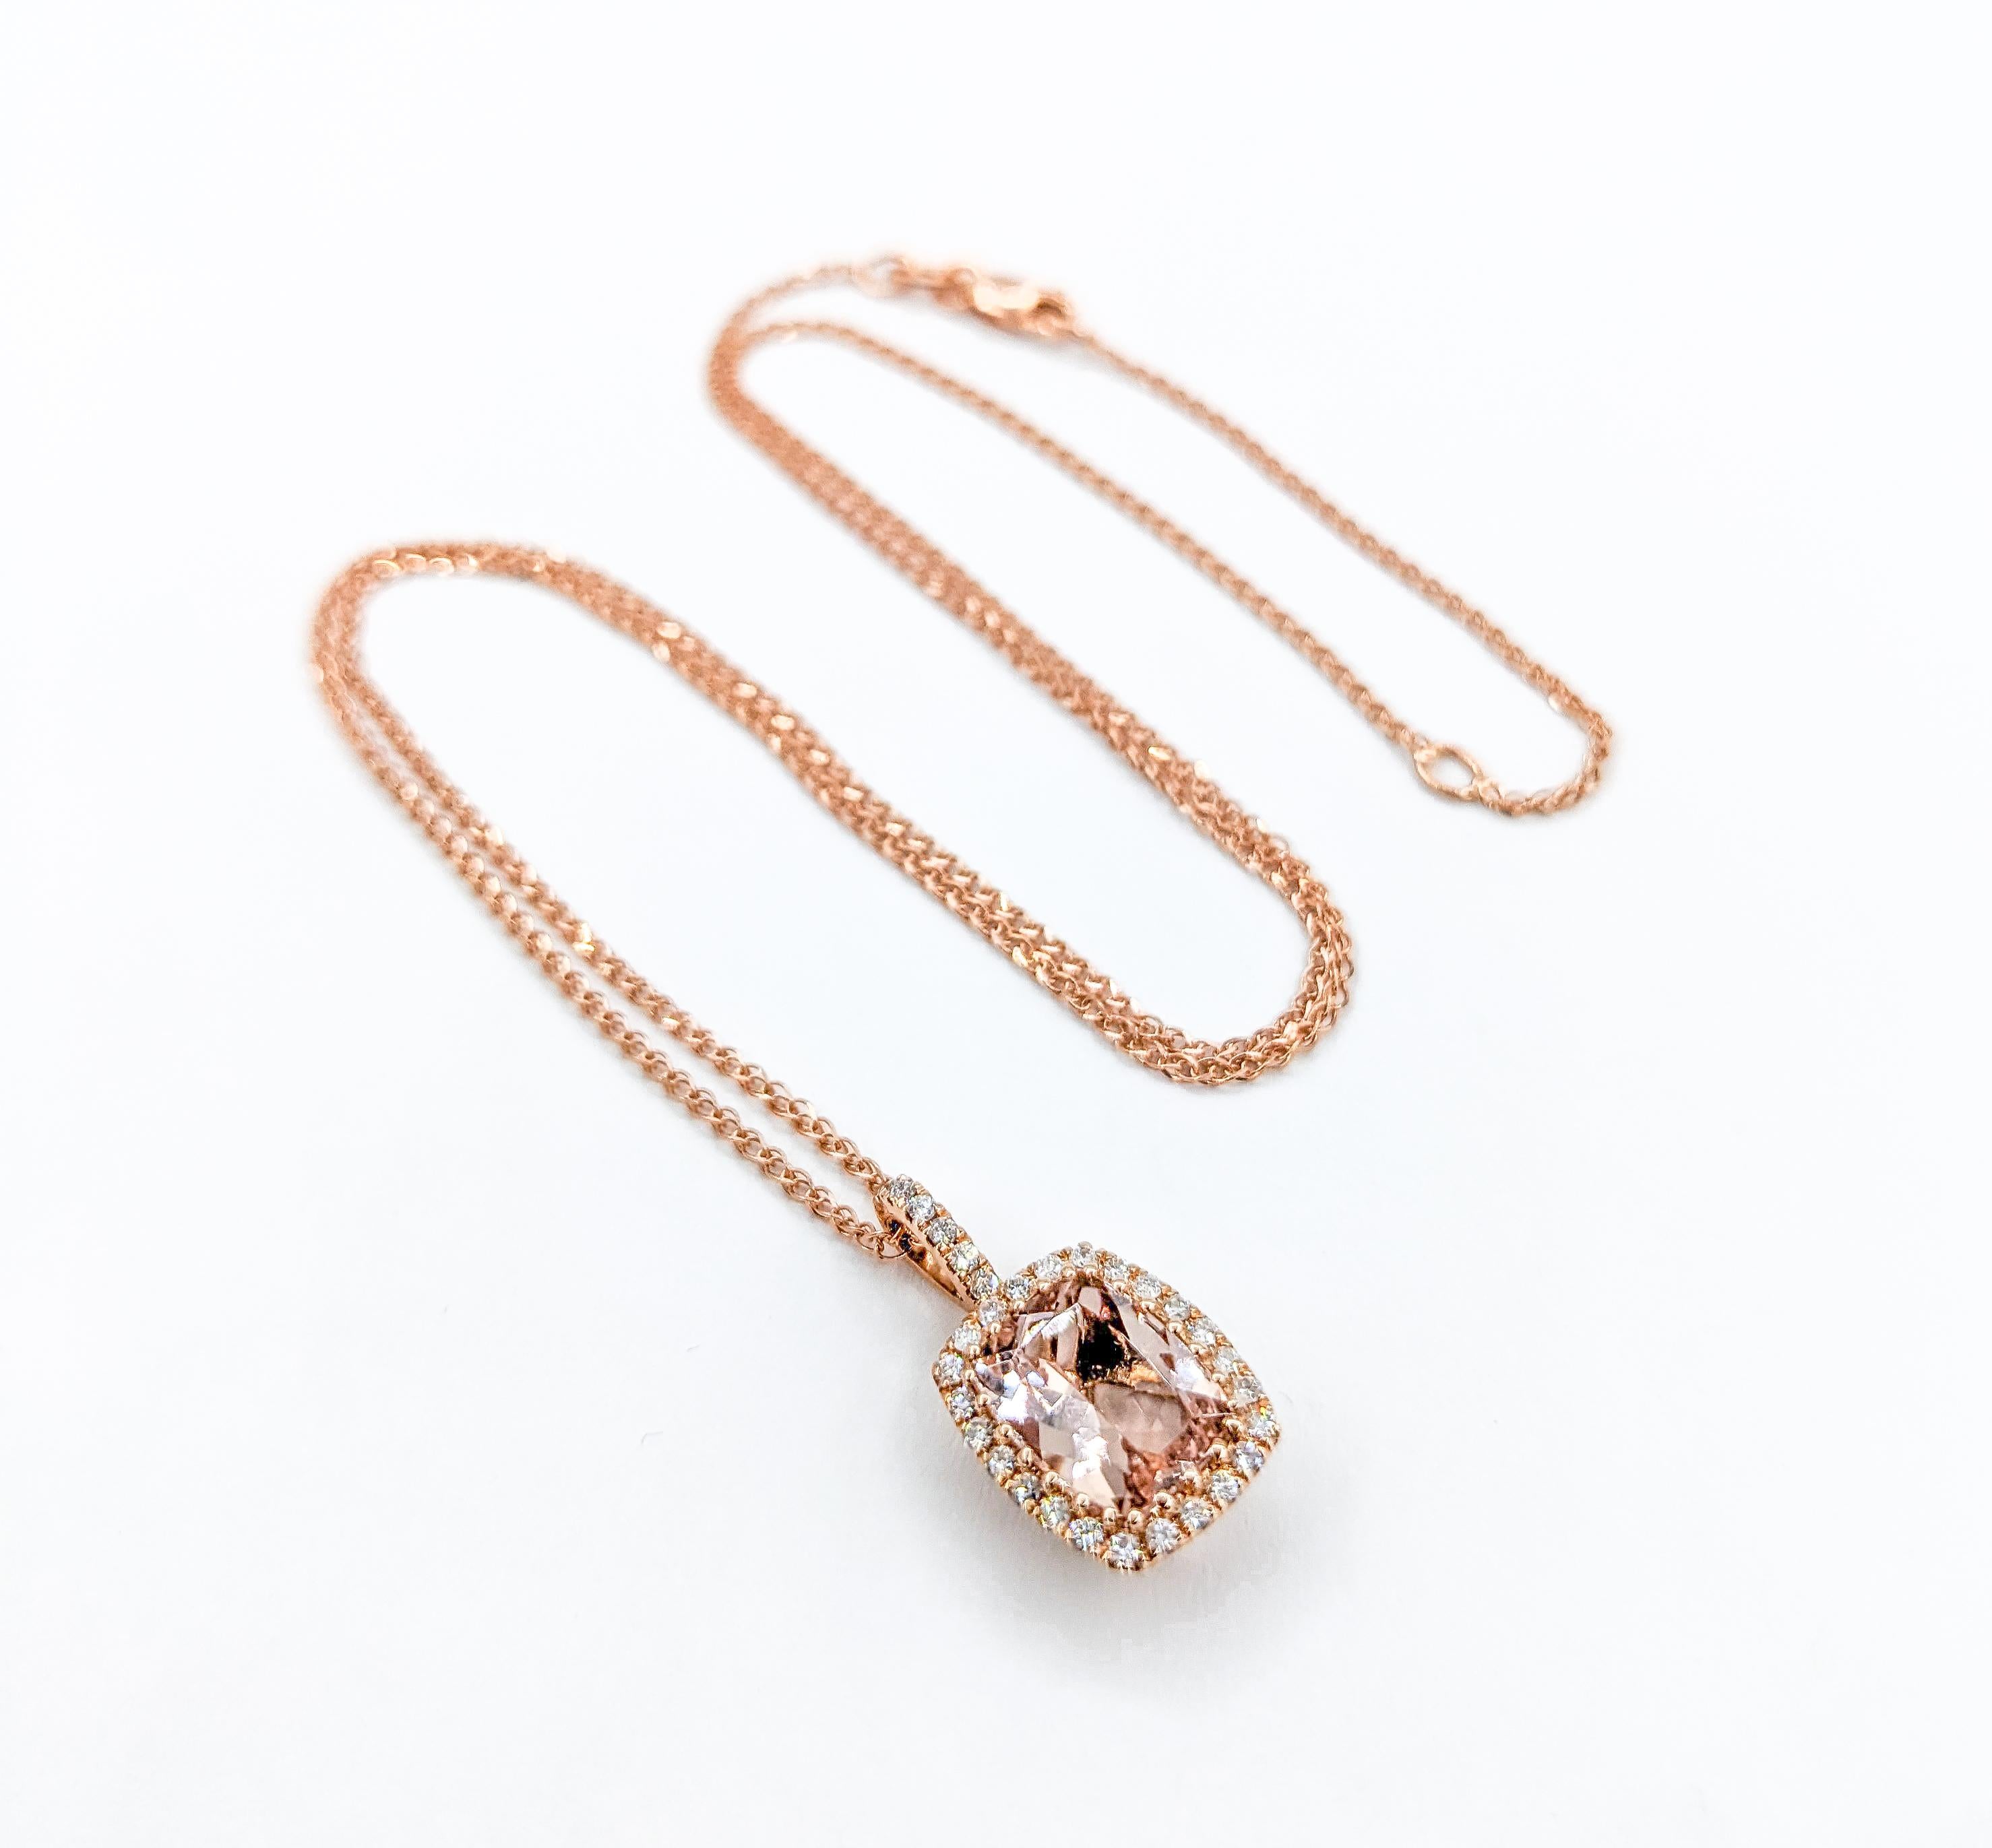 1.74ct Morganite & Diamond Pendant Necklace in Rose Gold

Introducing our exquisite Morganite Pendant in 14k Rose Gold. This dazzling pendant features a mesmerizing 1.74 carat Morganite graced by 0.18 carats of glittering Diamonds with exceptional